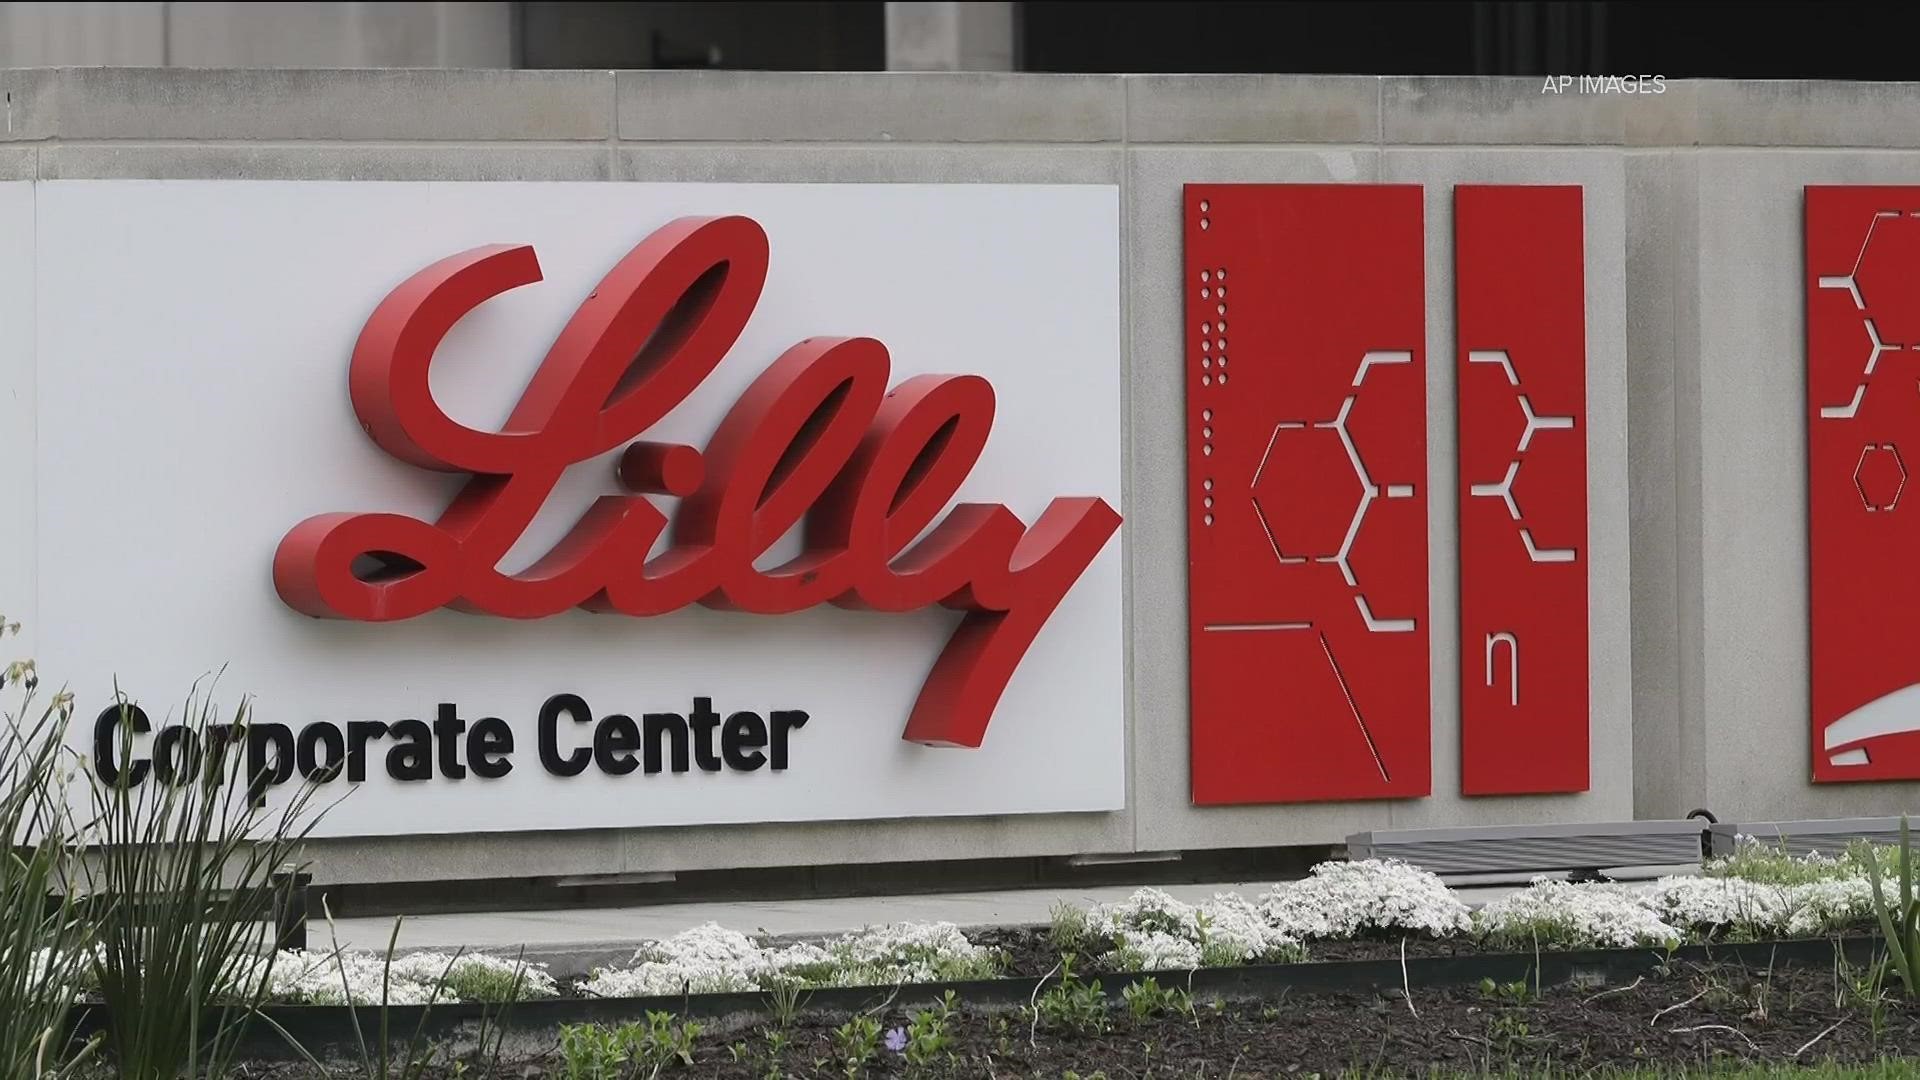 Pharmaceutical company Eli Lilly said it is cutting prices for its most prescribed insulins by 70%.